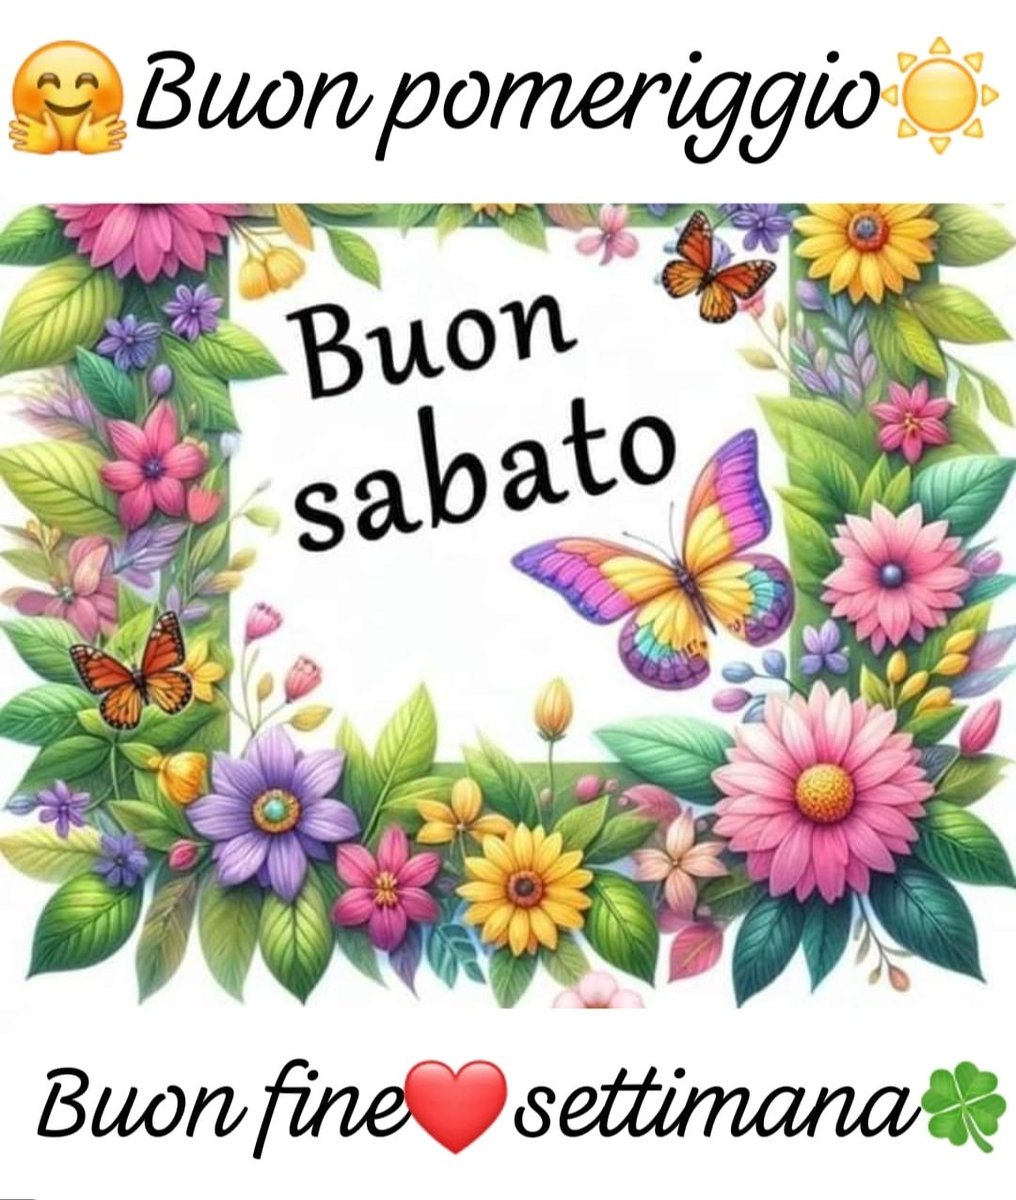 Ciao 👋 Tw ☀️🍀